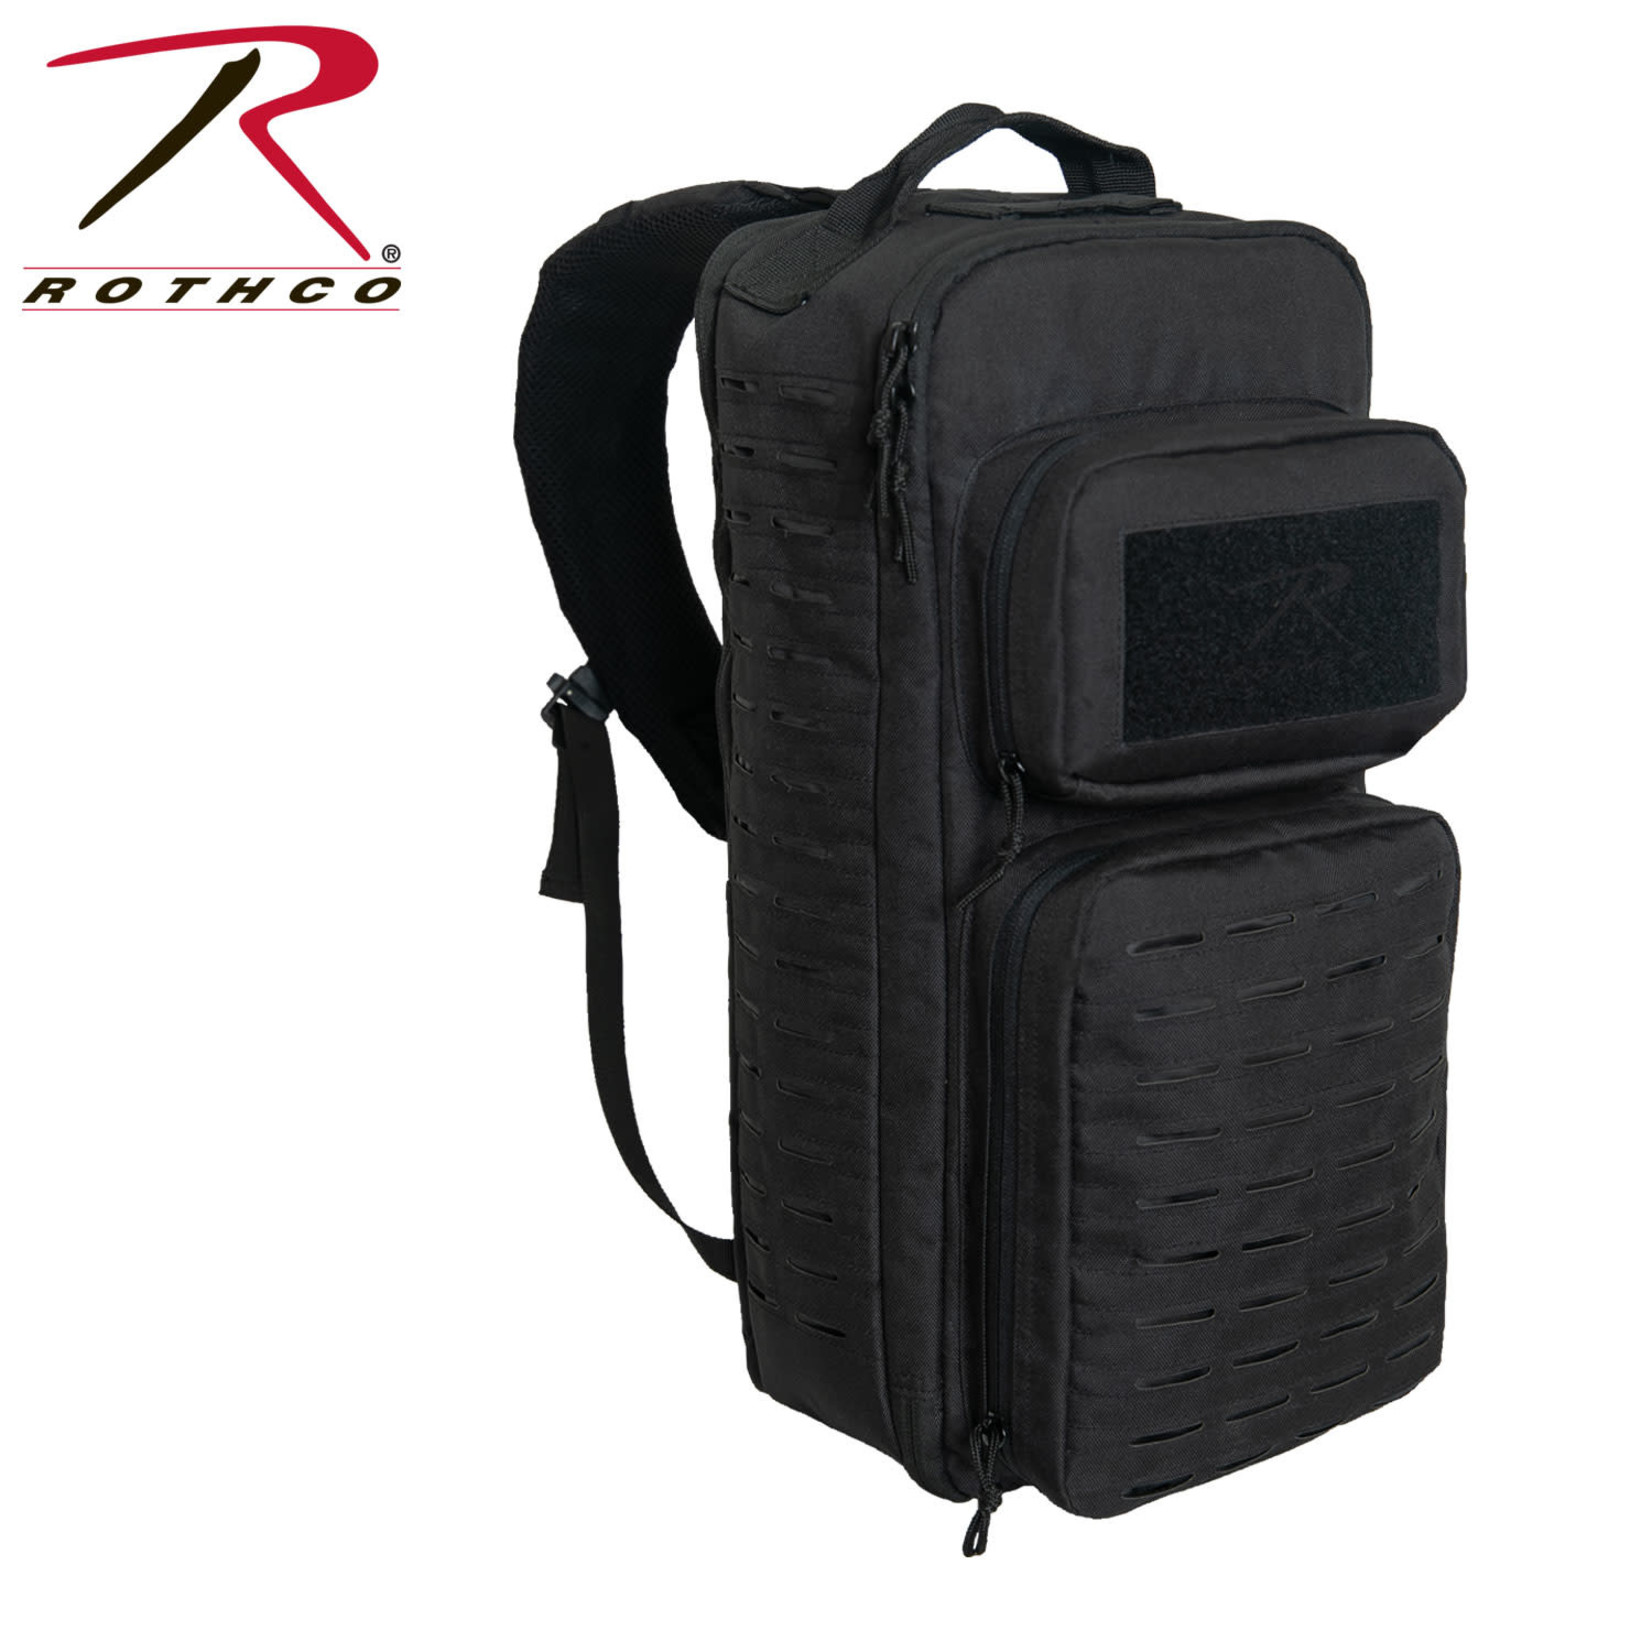 Rothco Rothco Tactical Sling Pack w/ Laser Cut MOLLE